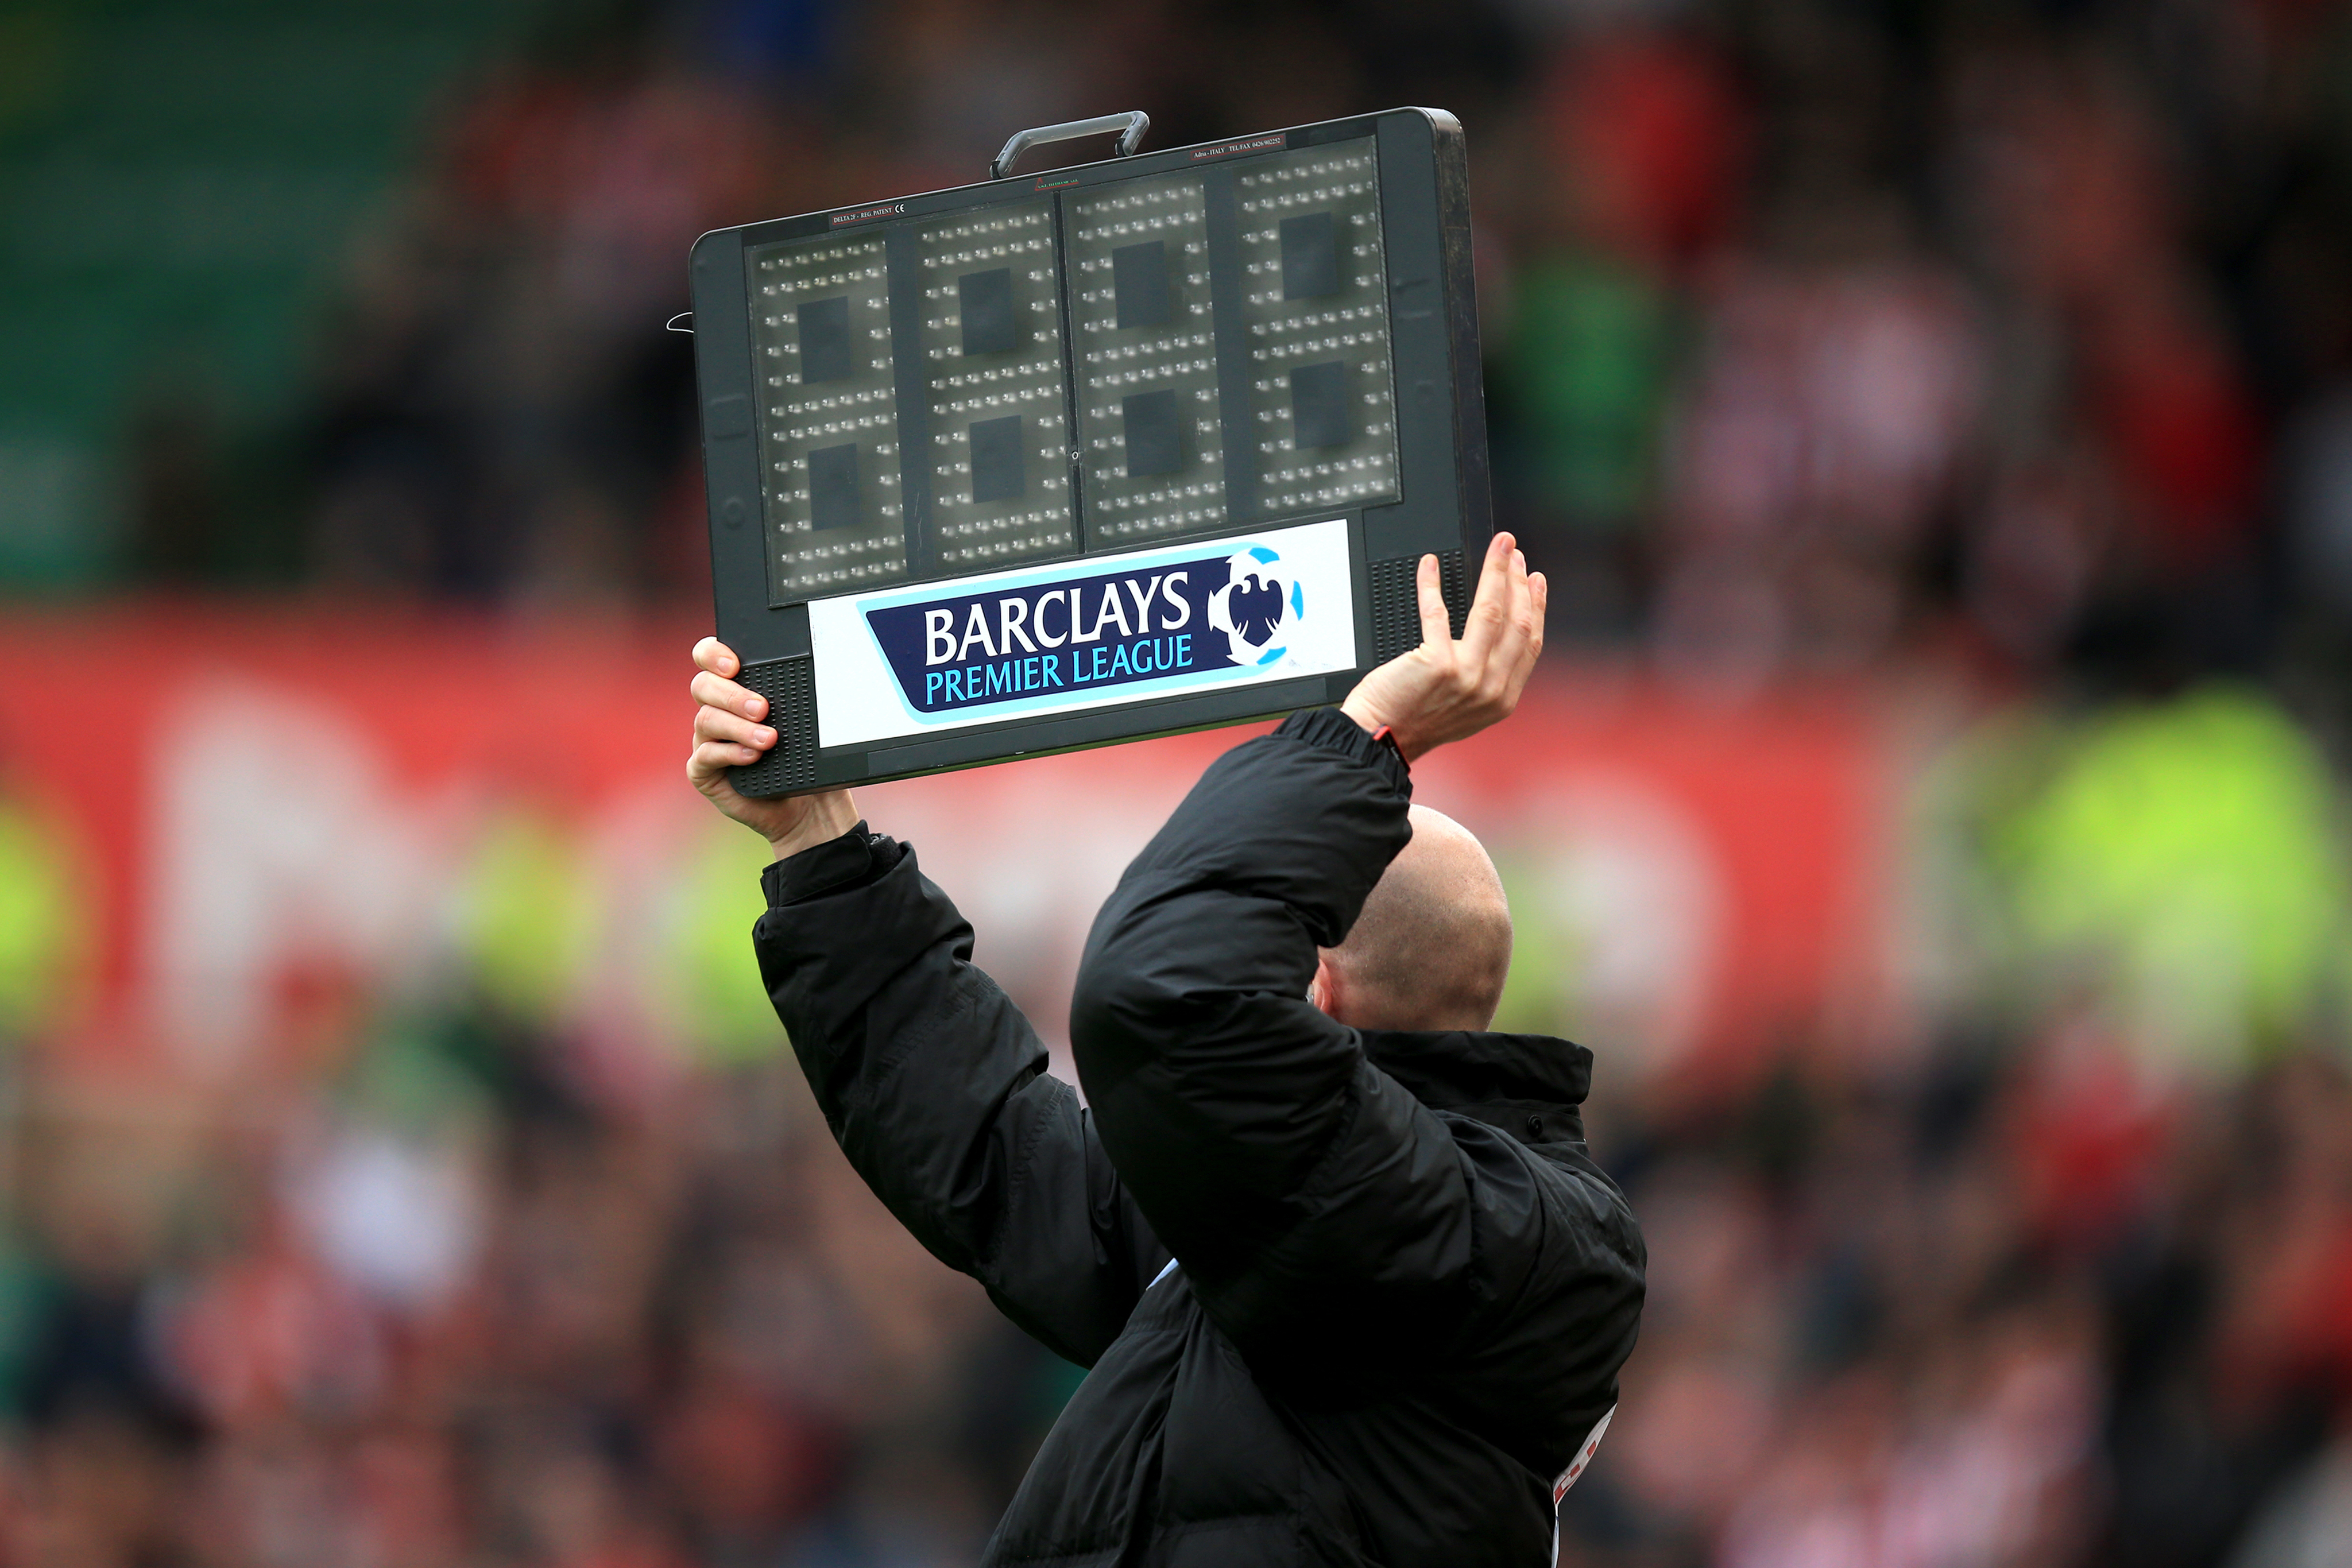 The fourth official holds up the board to signify added time